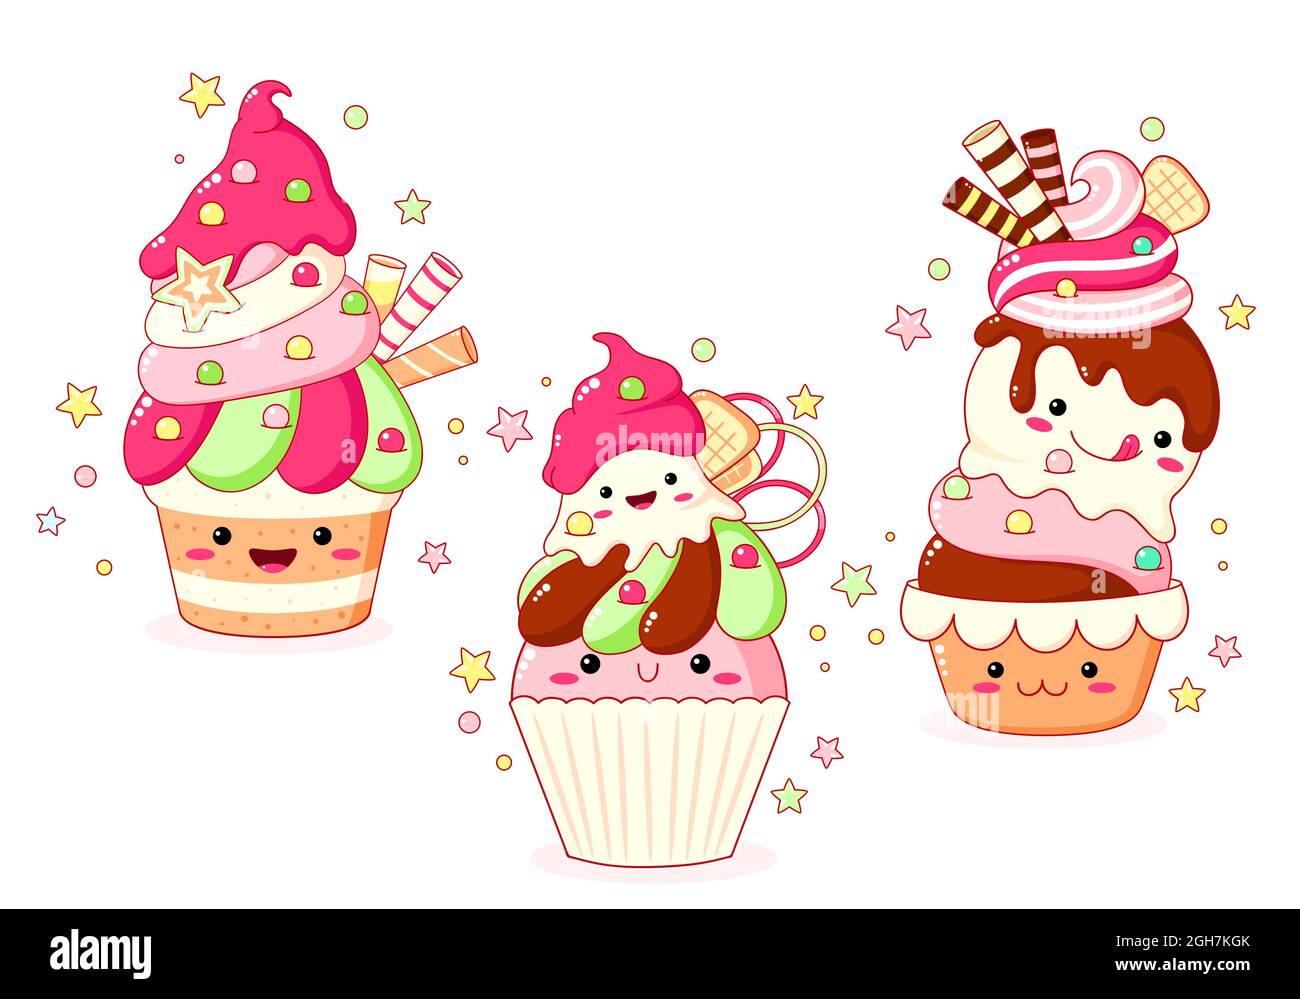 Set of cute sweet icons in kawaii style with smiling face and pink cheeks for sweet design. Ice cream, cake, sundae kids, cupcake. EPS8 Stock Vector